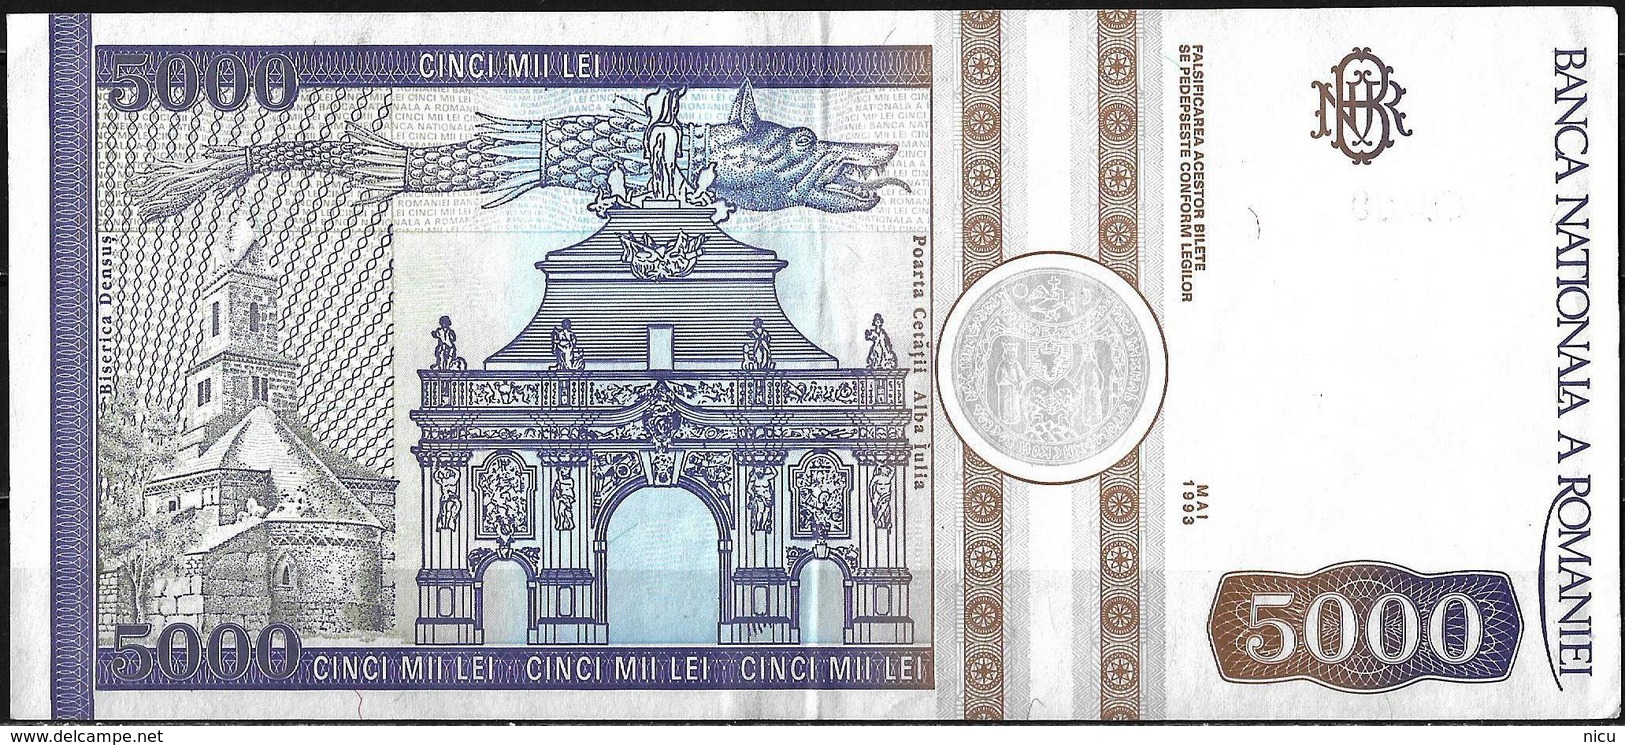 5.000 LEI BANKNOTE FROM ROMANIA EDITED IN MAY 1993 - Rumania